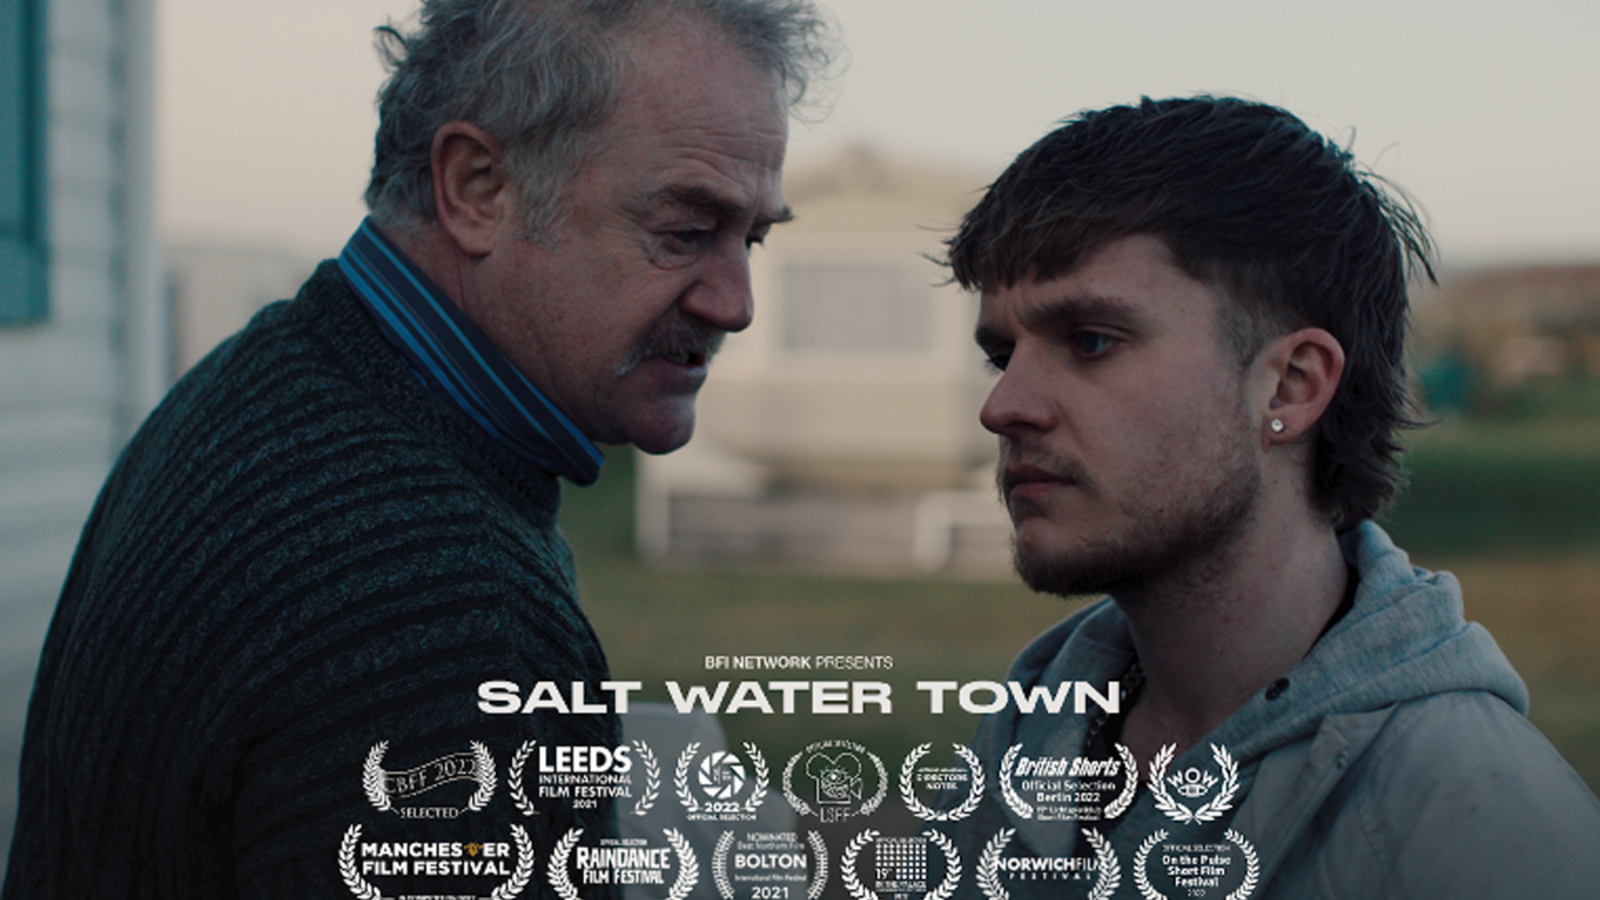 Salt Water Town poster featuring Owen Teale and Tom Glynn-Carney